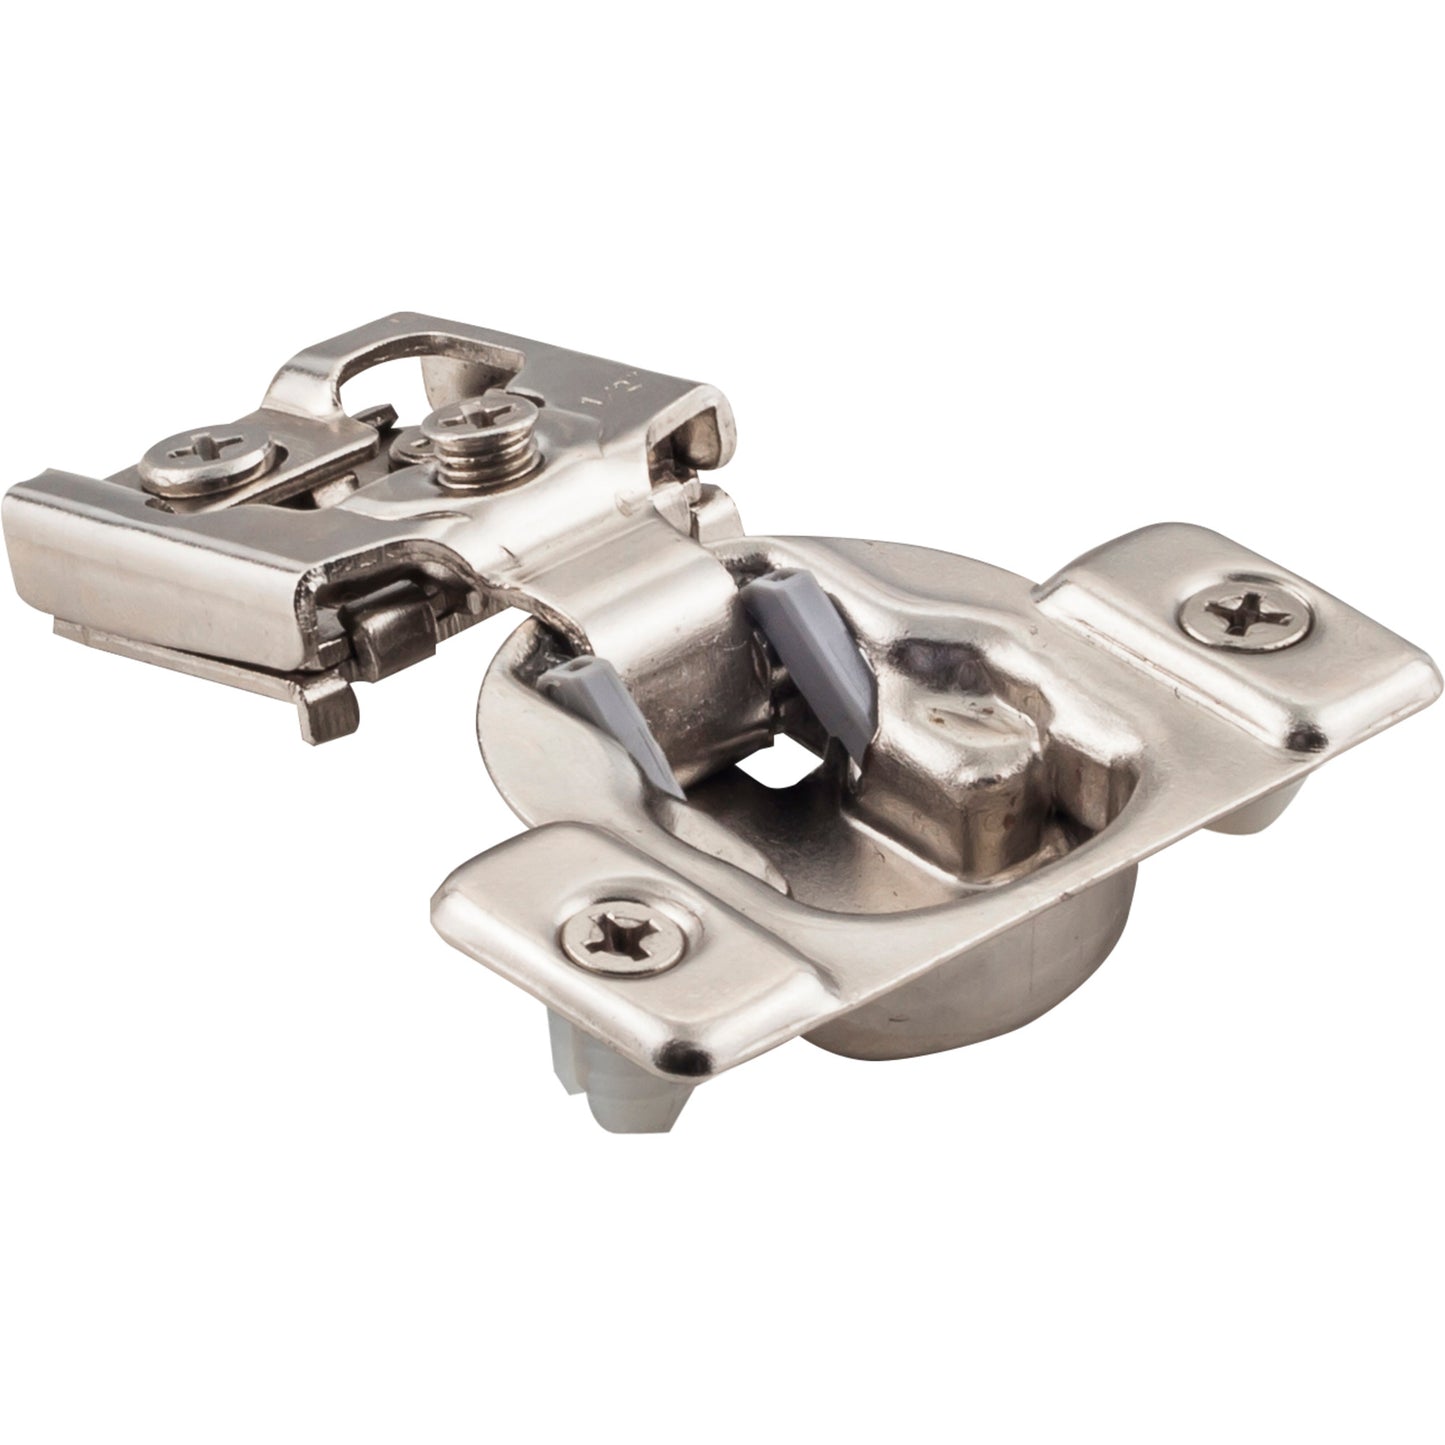 HARDWARE RESOURCES 6390-2-2C 105° 1/2" Overlay DURA-CLOSE® Self-close Compact Hinge with 2 Cleats and Press-in 8mm Dowels.